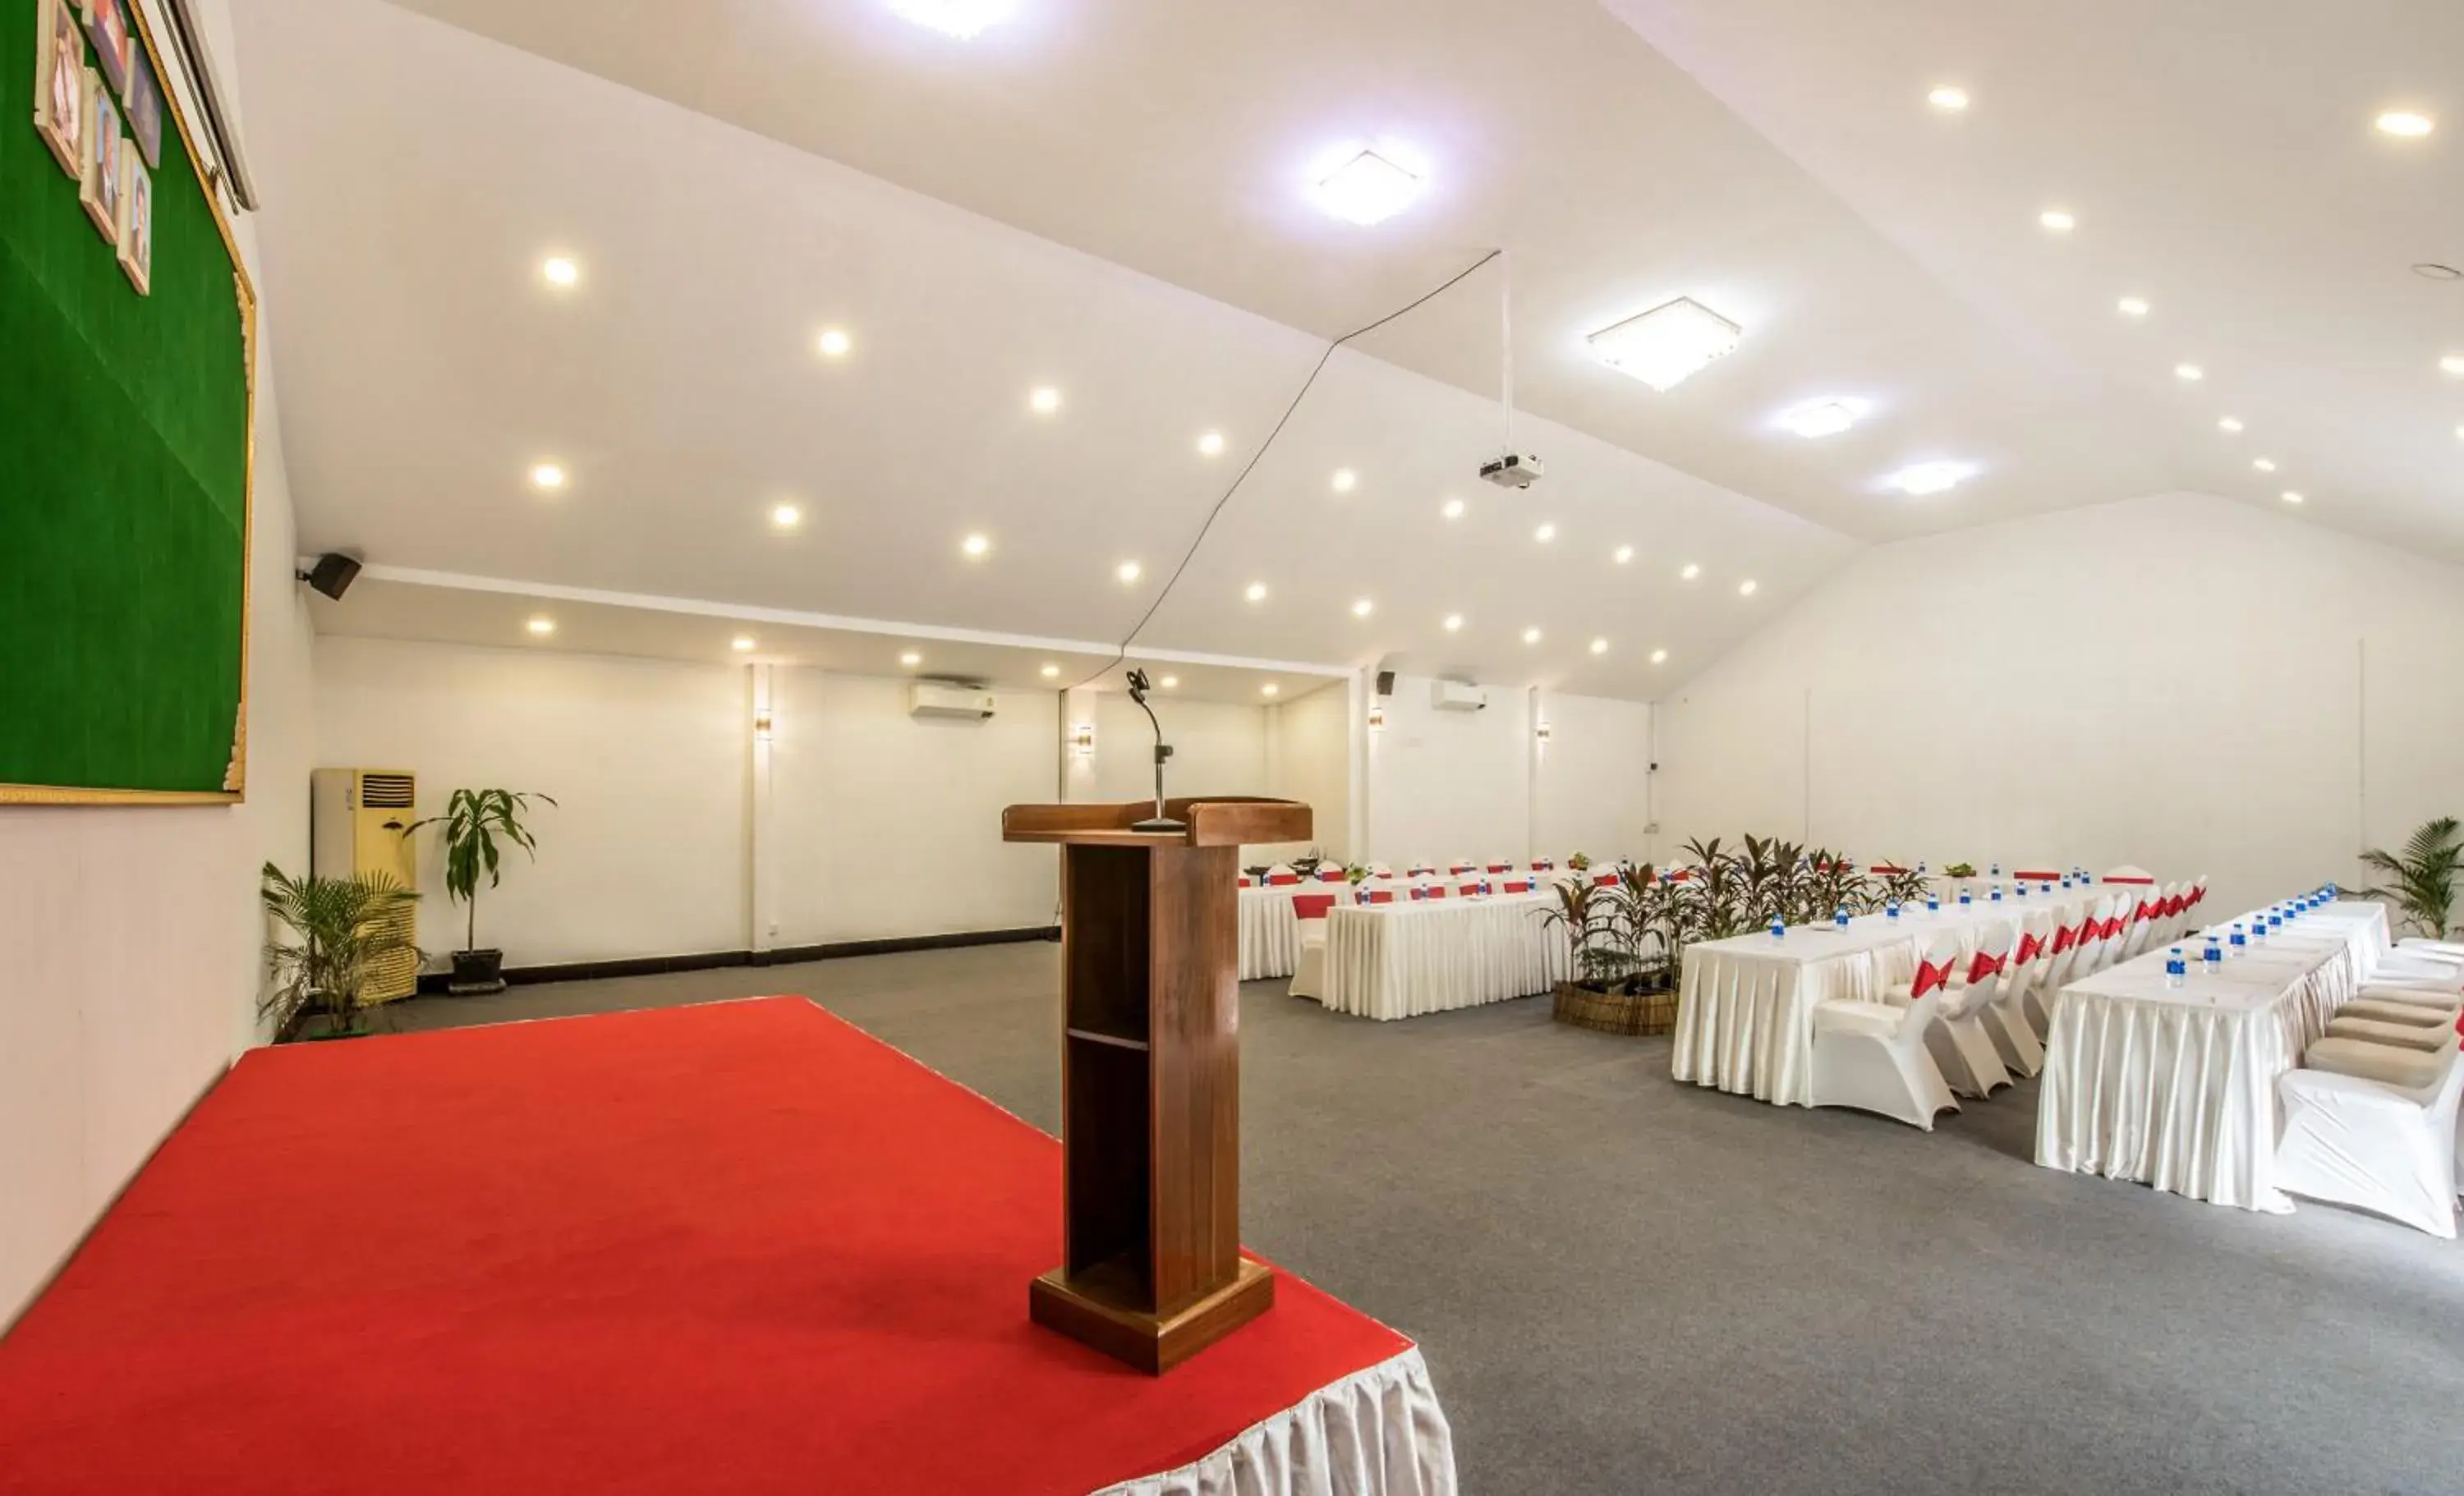 Meeting/conference room, Banquet Facilities in The Sanctuary Residence